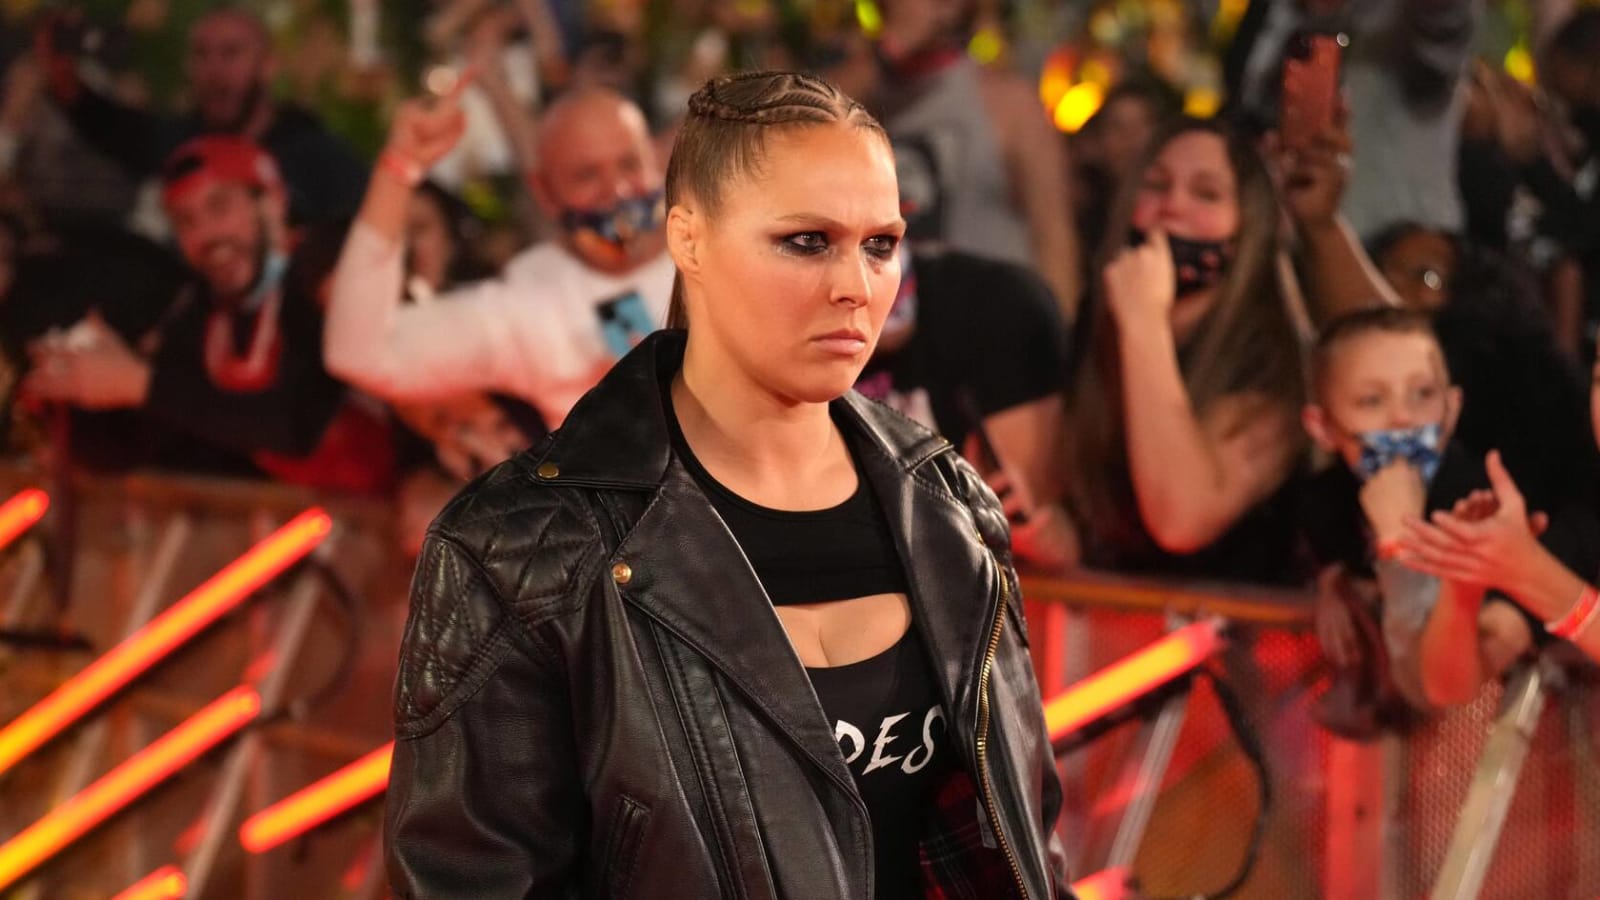 ‘Russian Ronda Rousey’ has date set for UFC debut